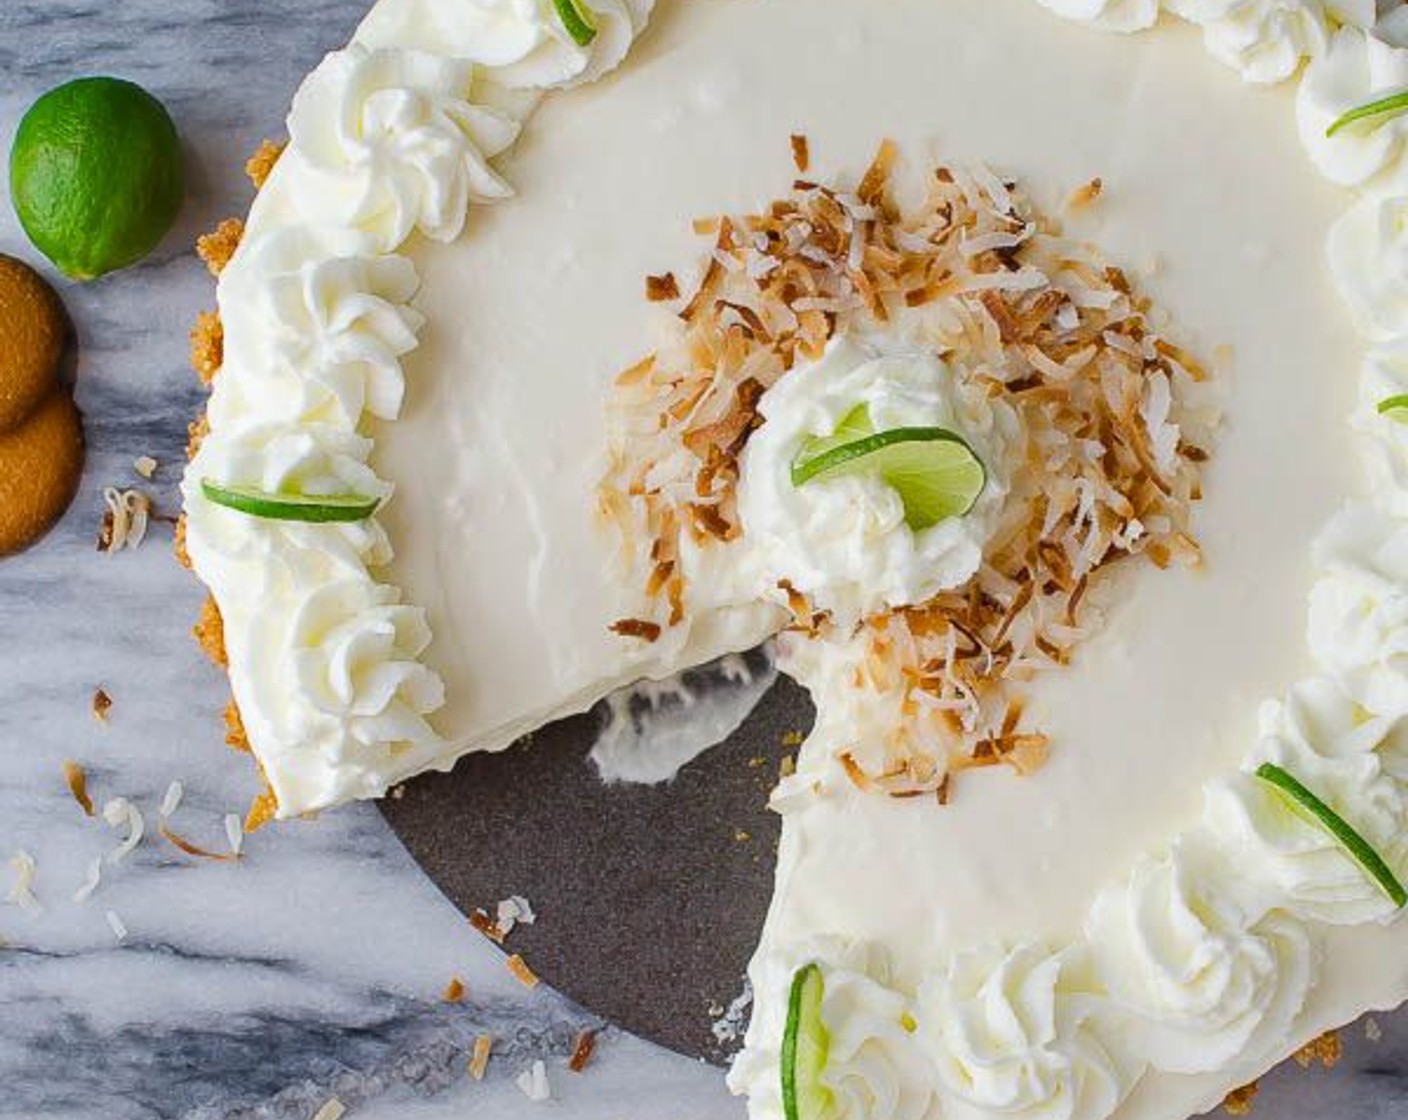 Whipped Key Lime Tart with Coconut Wafer Crust